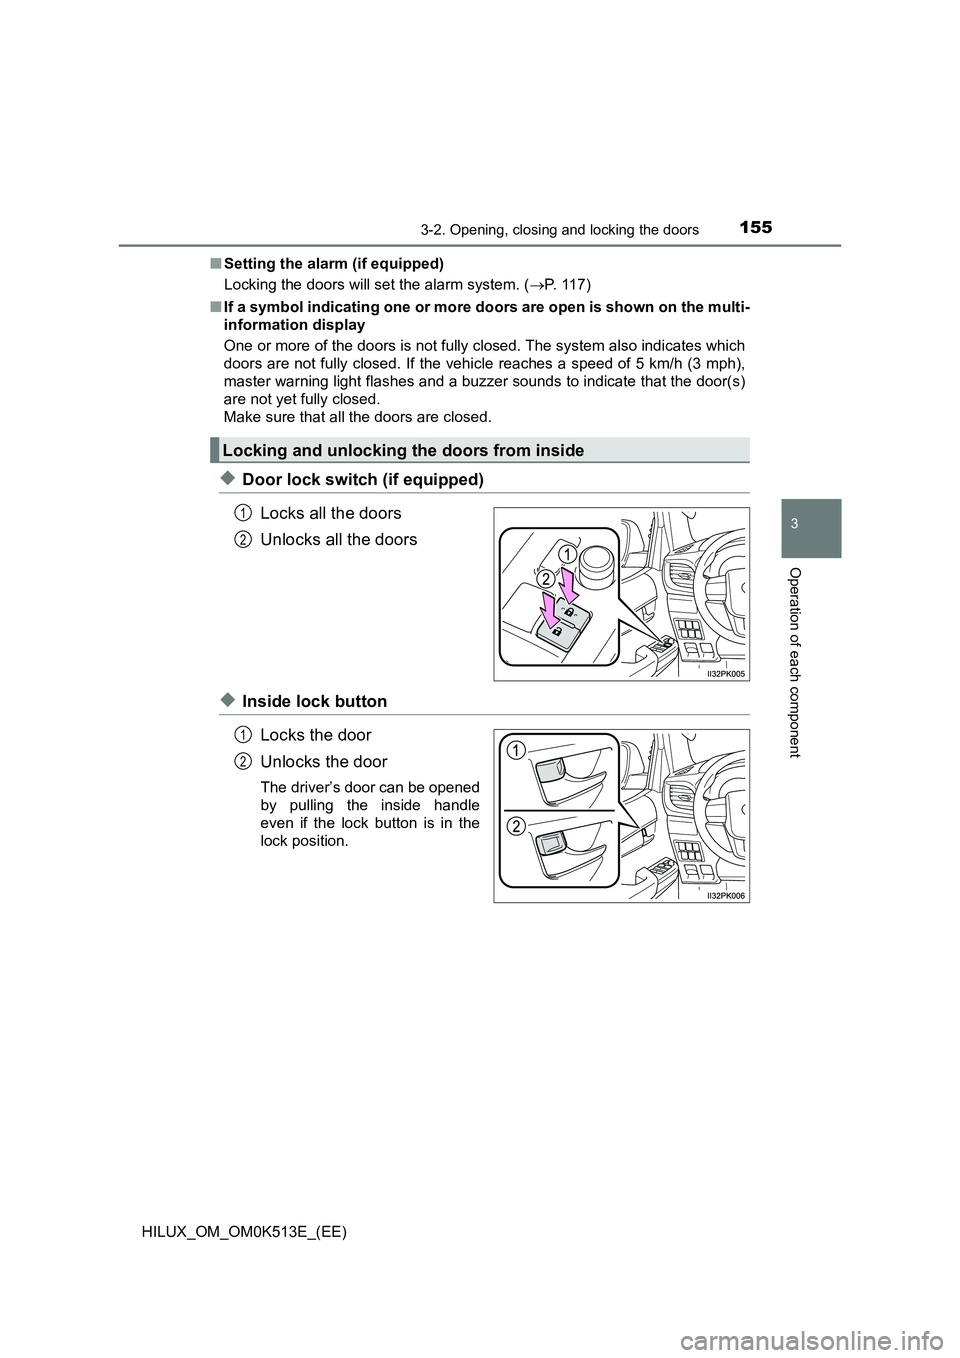 TOYOTA HILUX 2021  Owners Manual (in English) 1553-2. Opening, closing and locking the doors
3
Operation of each component
HILUX_OM_OM0K513E_(EE) 
�Q Setting the alarm (if equipped) 
Locking the doors will set the alarm system. ( P. 117) 
�Q I